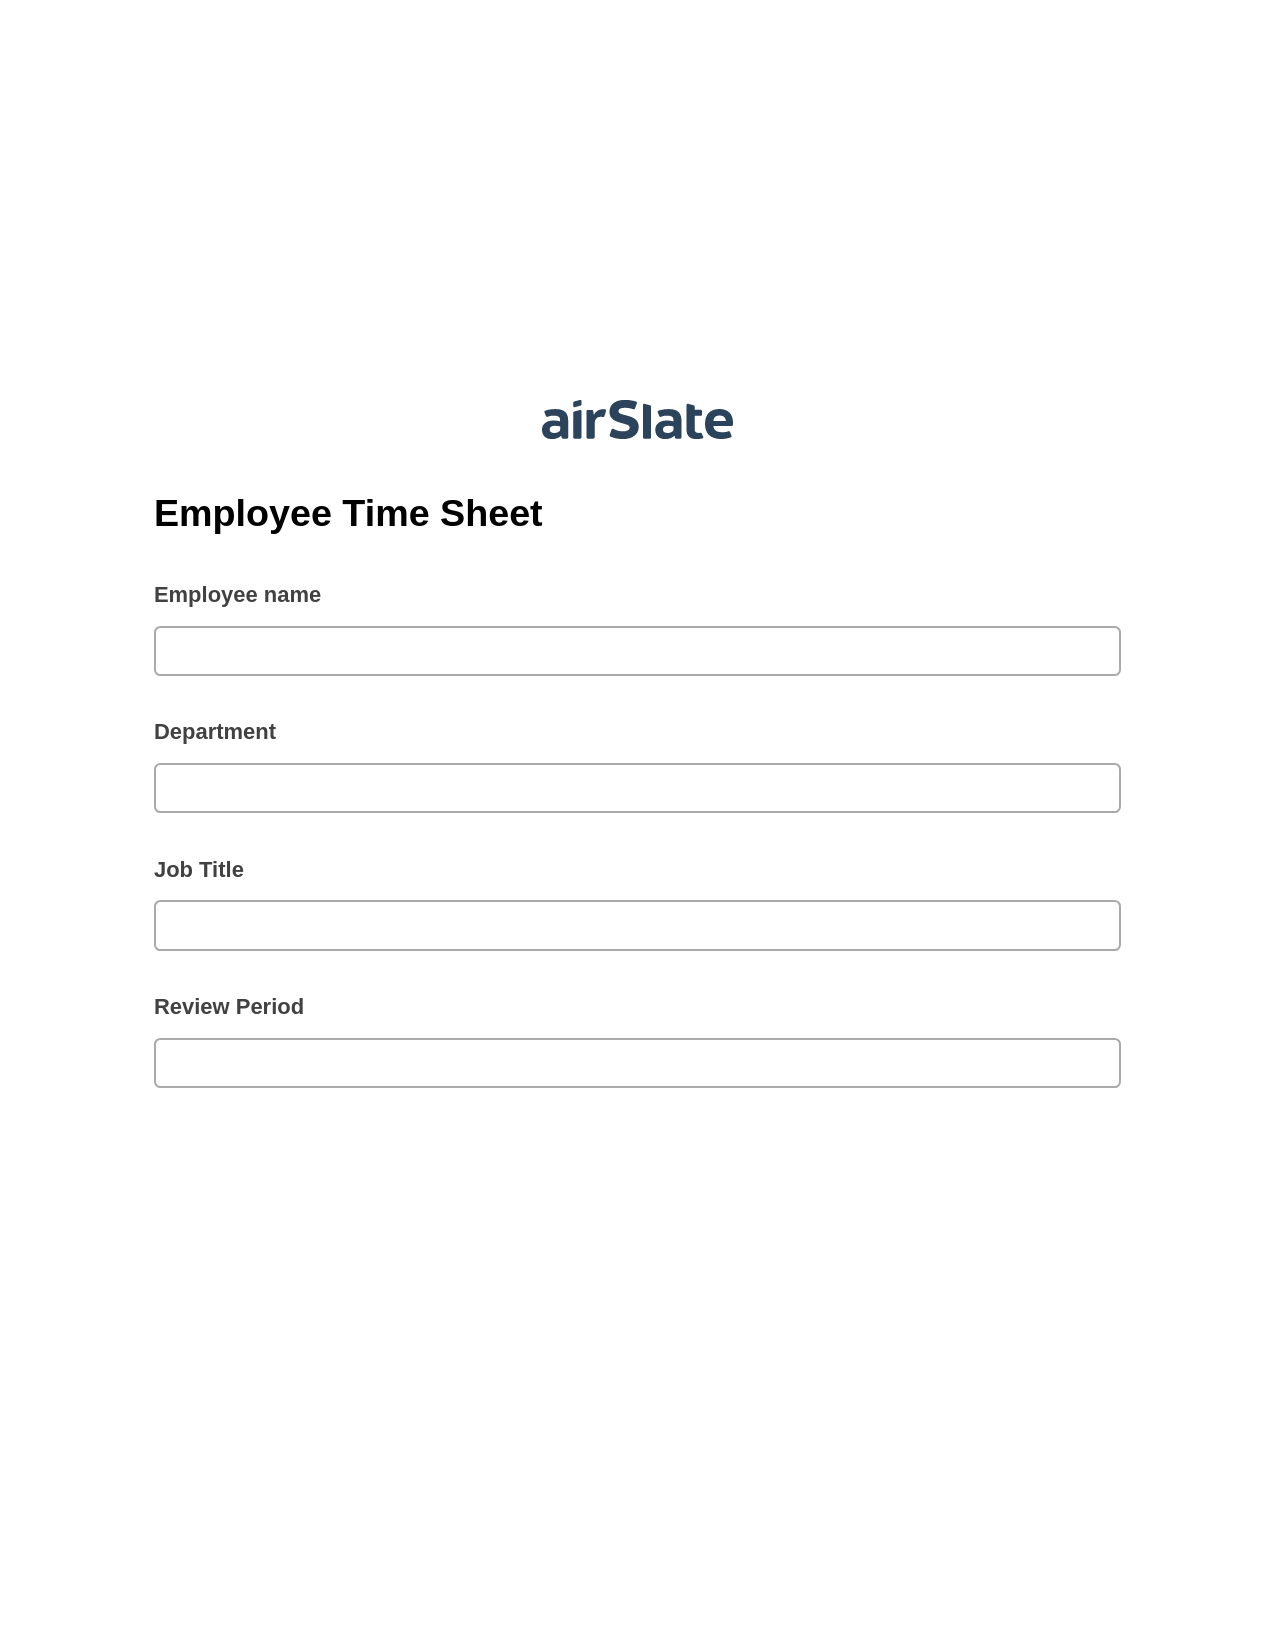 Multirole Employee Time Sheet Pre-fill from Salesforce Records Bot, Update Audit Trail Bot, Export to Salesforce Record Bot